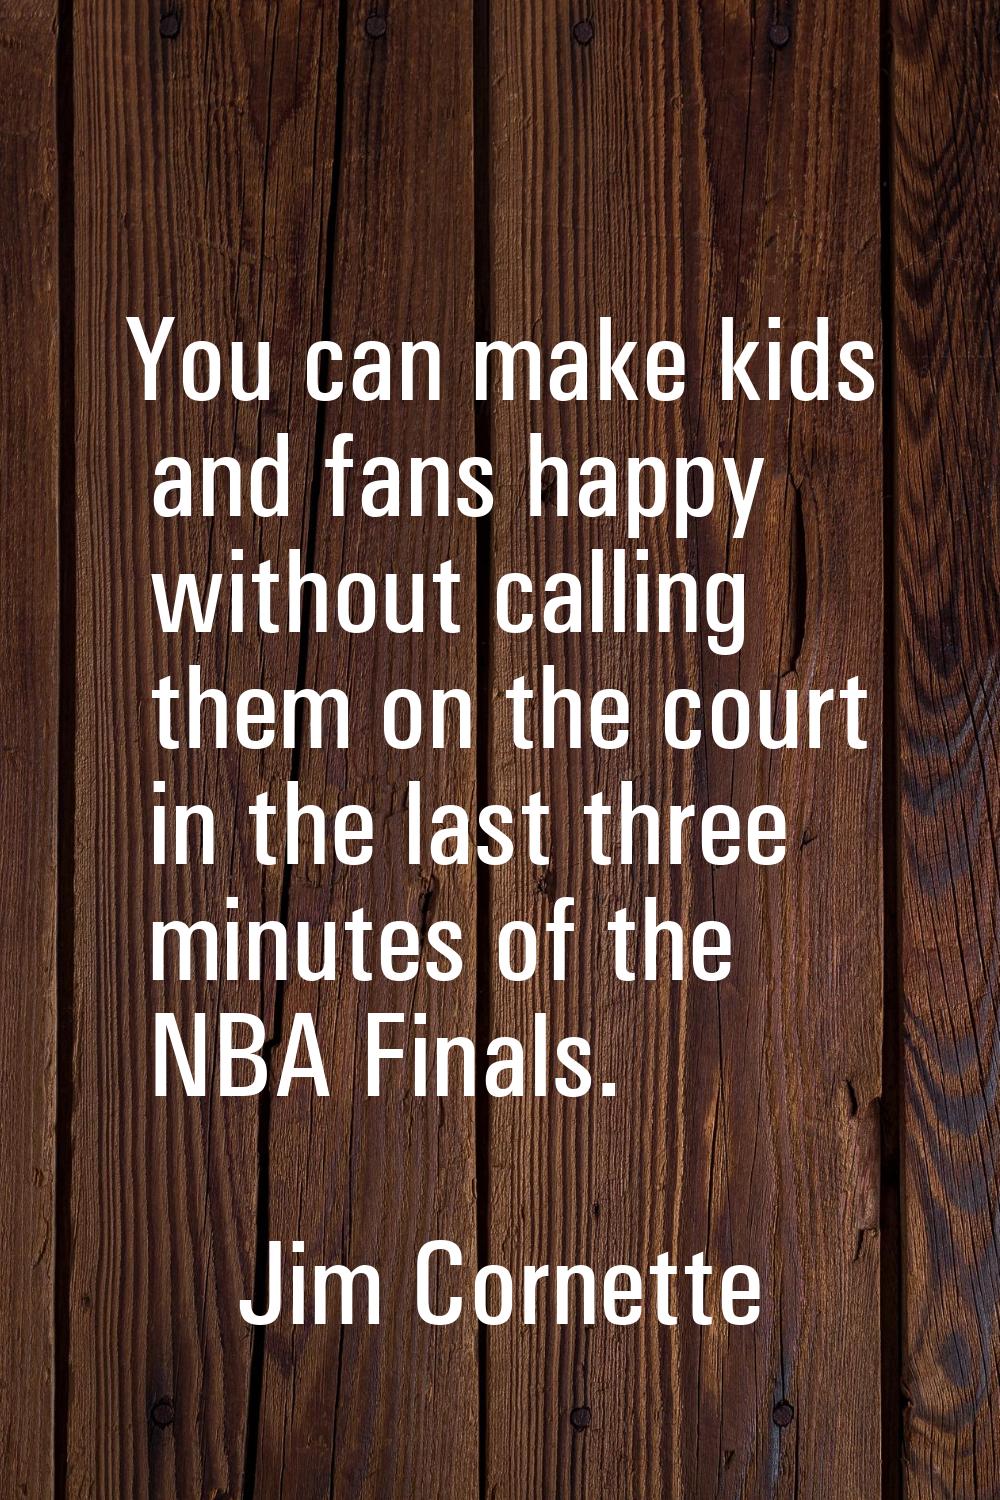 You can make kids and fans happy without calling them on the court in the last three minutes of the